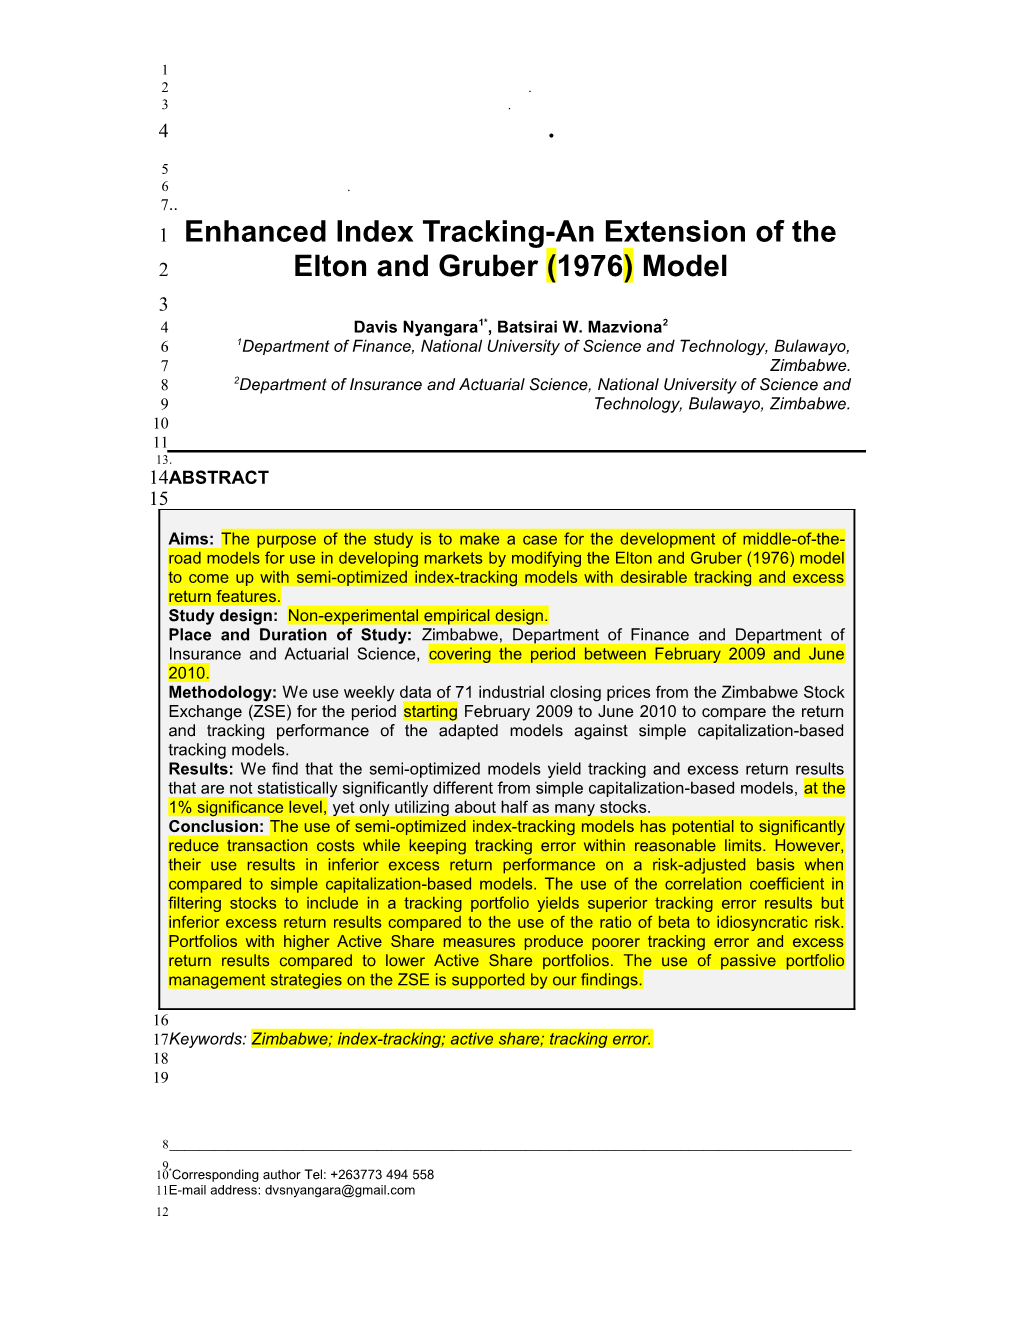 Enhanced Index Tracking-An Extension of the Elton and Gruber (1976) Model